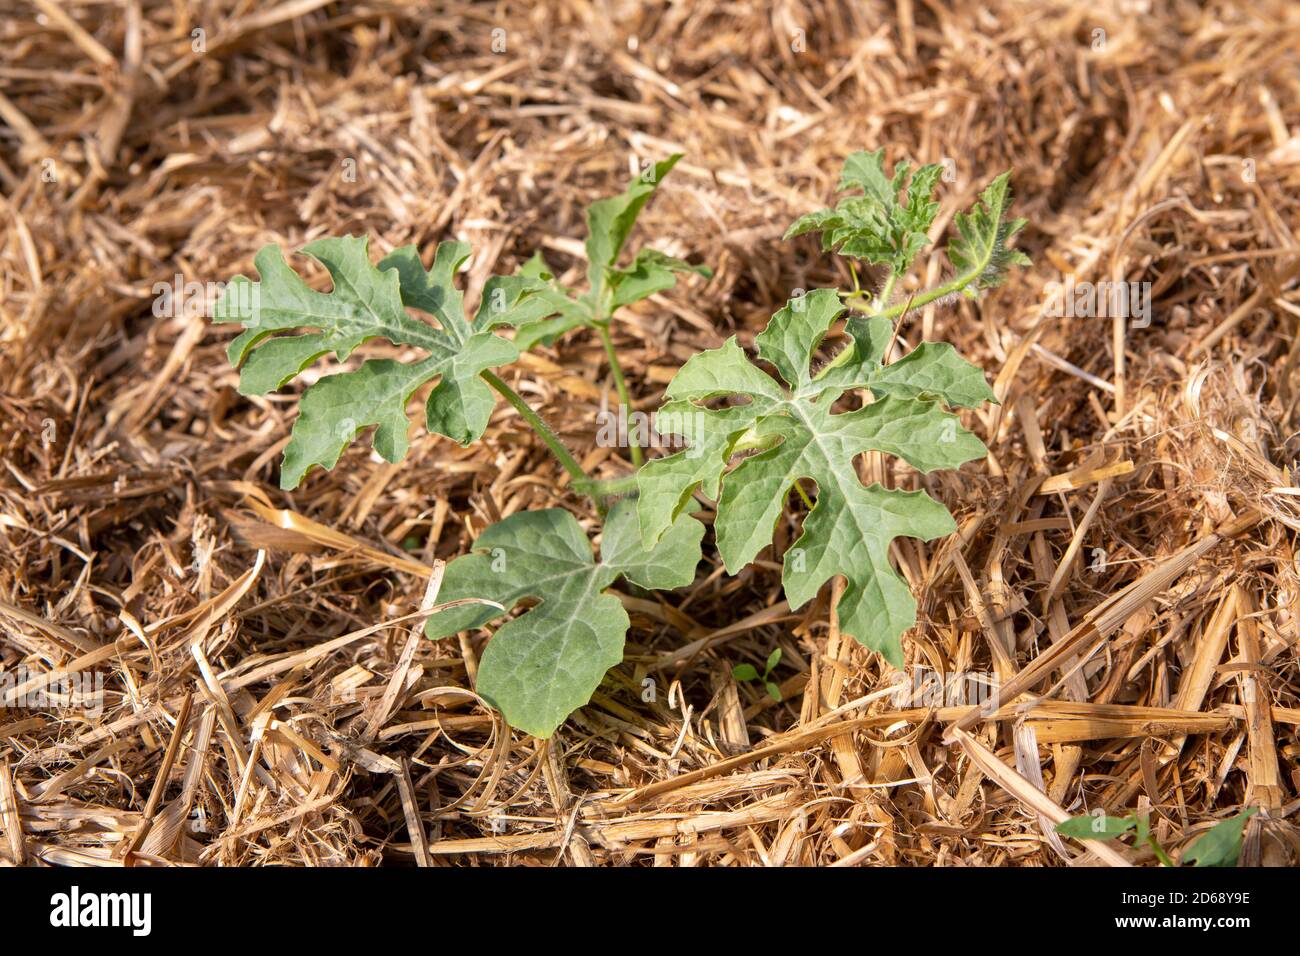 Organic small Pastèque or Watermelon plant (Citrullus lanatus) growing in a mulch bedding of straw. Stock Photo